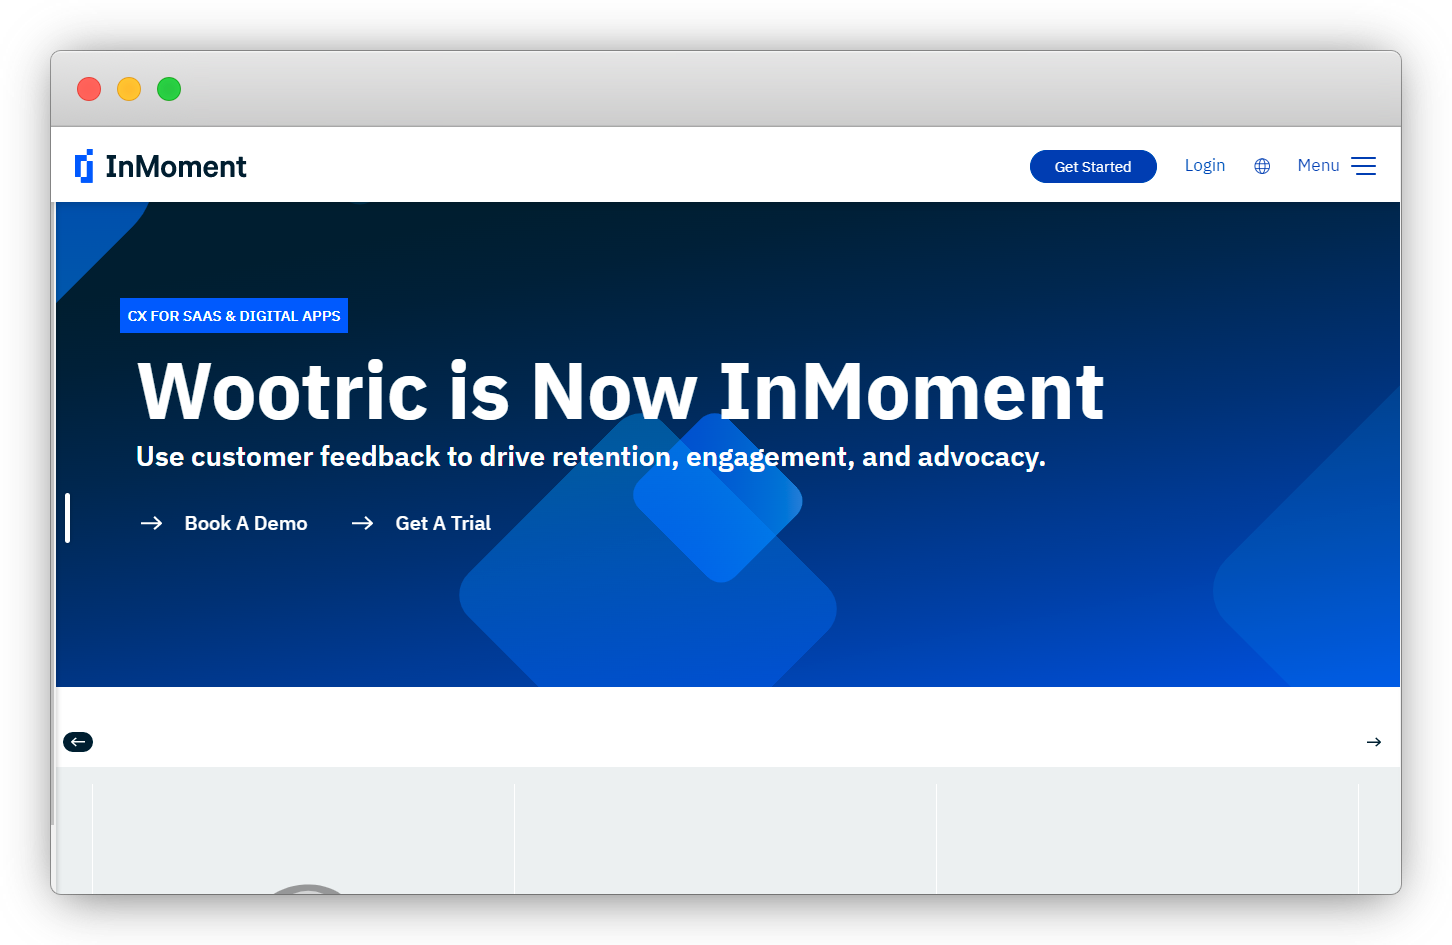 Salesforce survey tools Wootric by InMoment